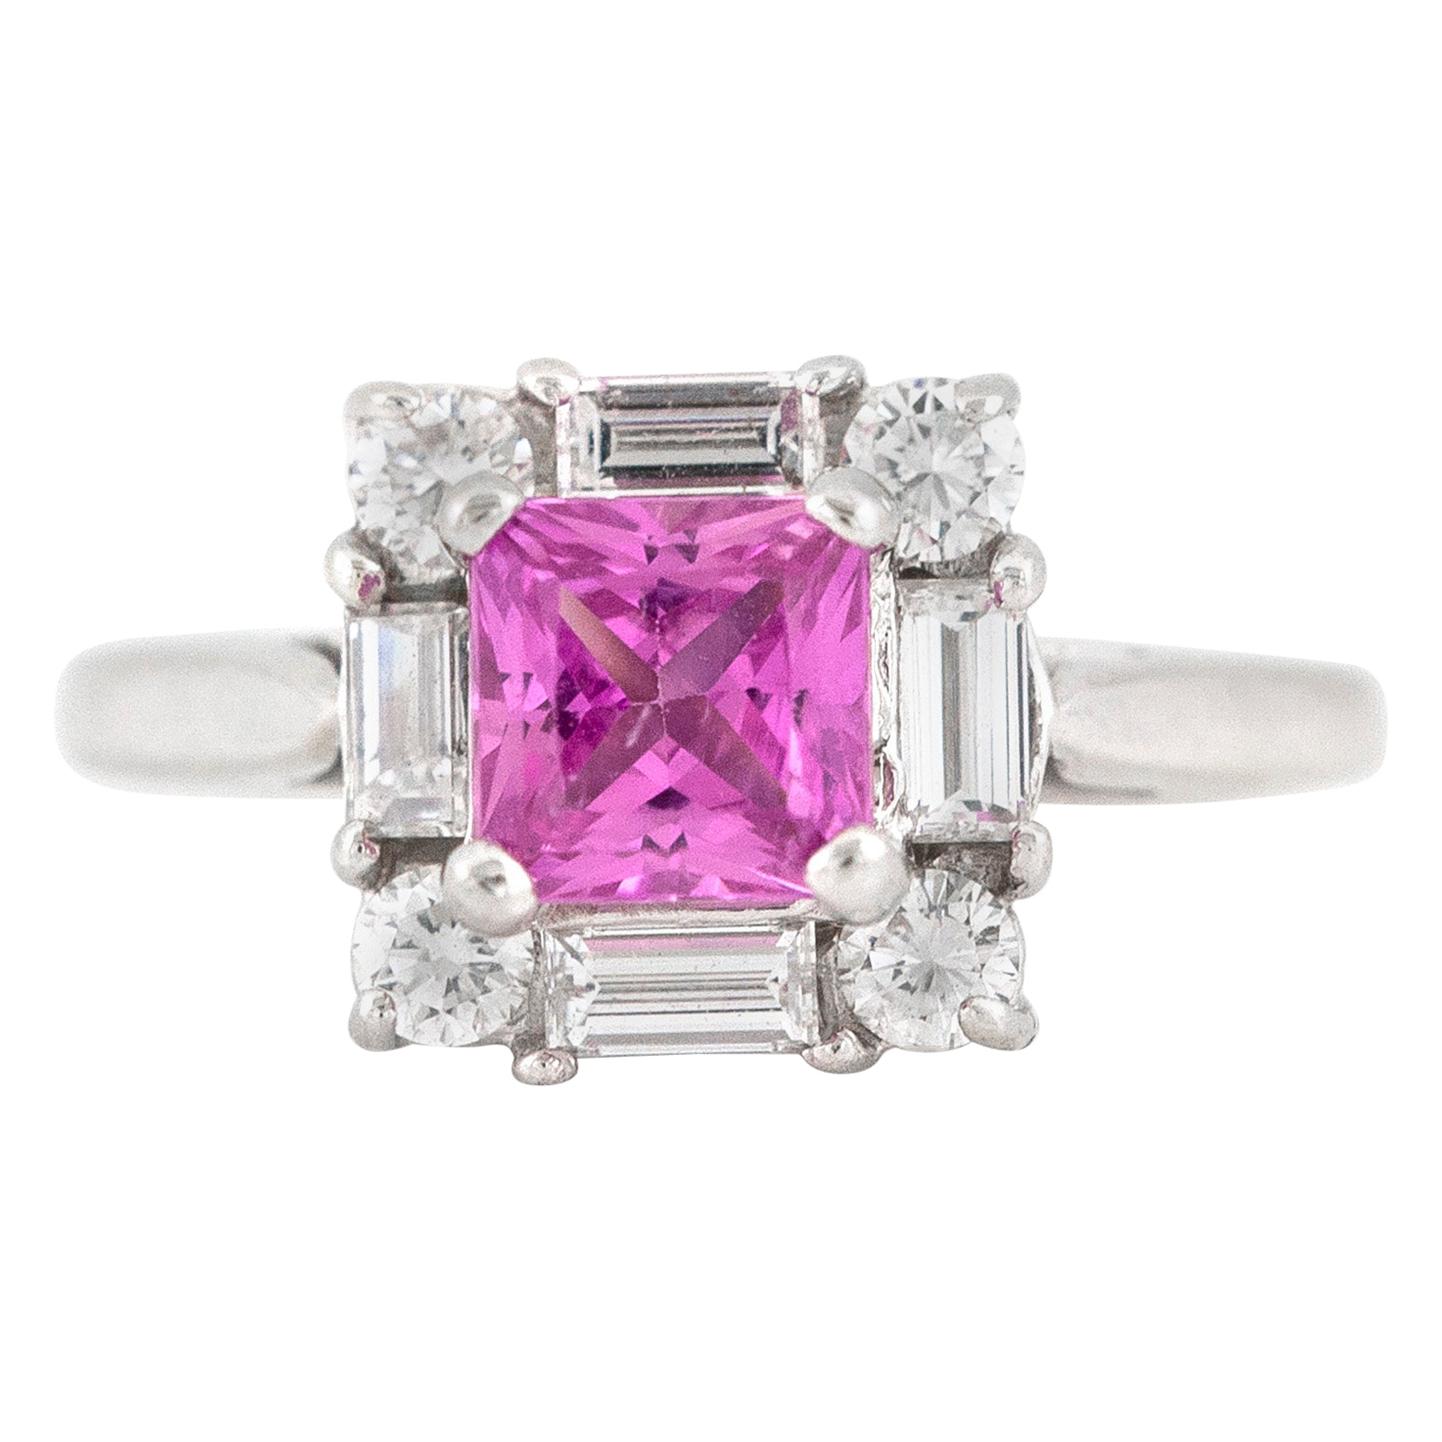 Square Pink Sapphire with Diamonds in 18 Karat White Gold Ring